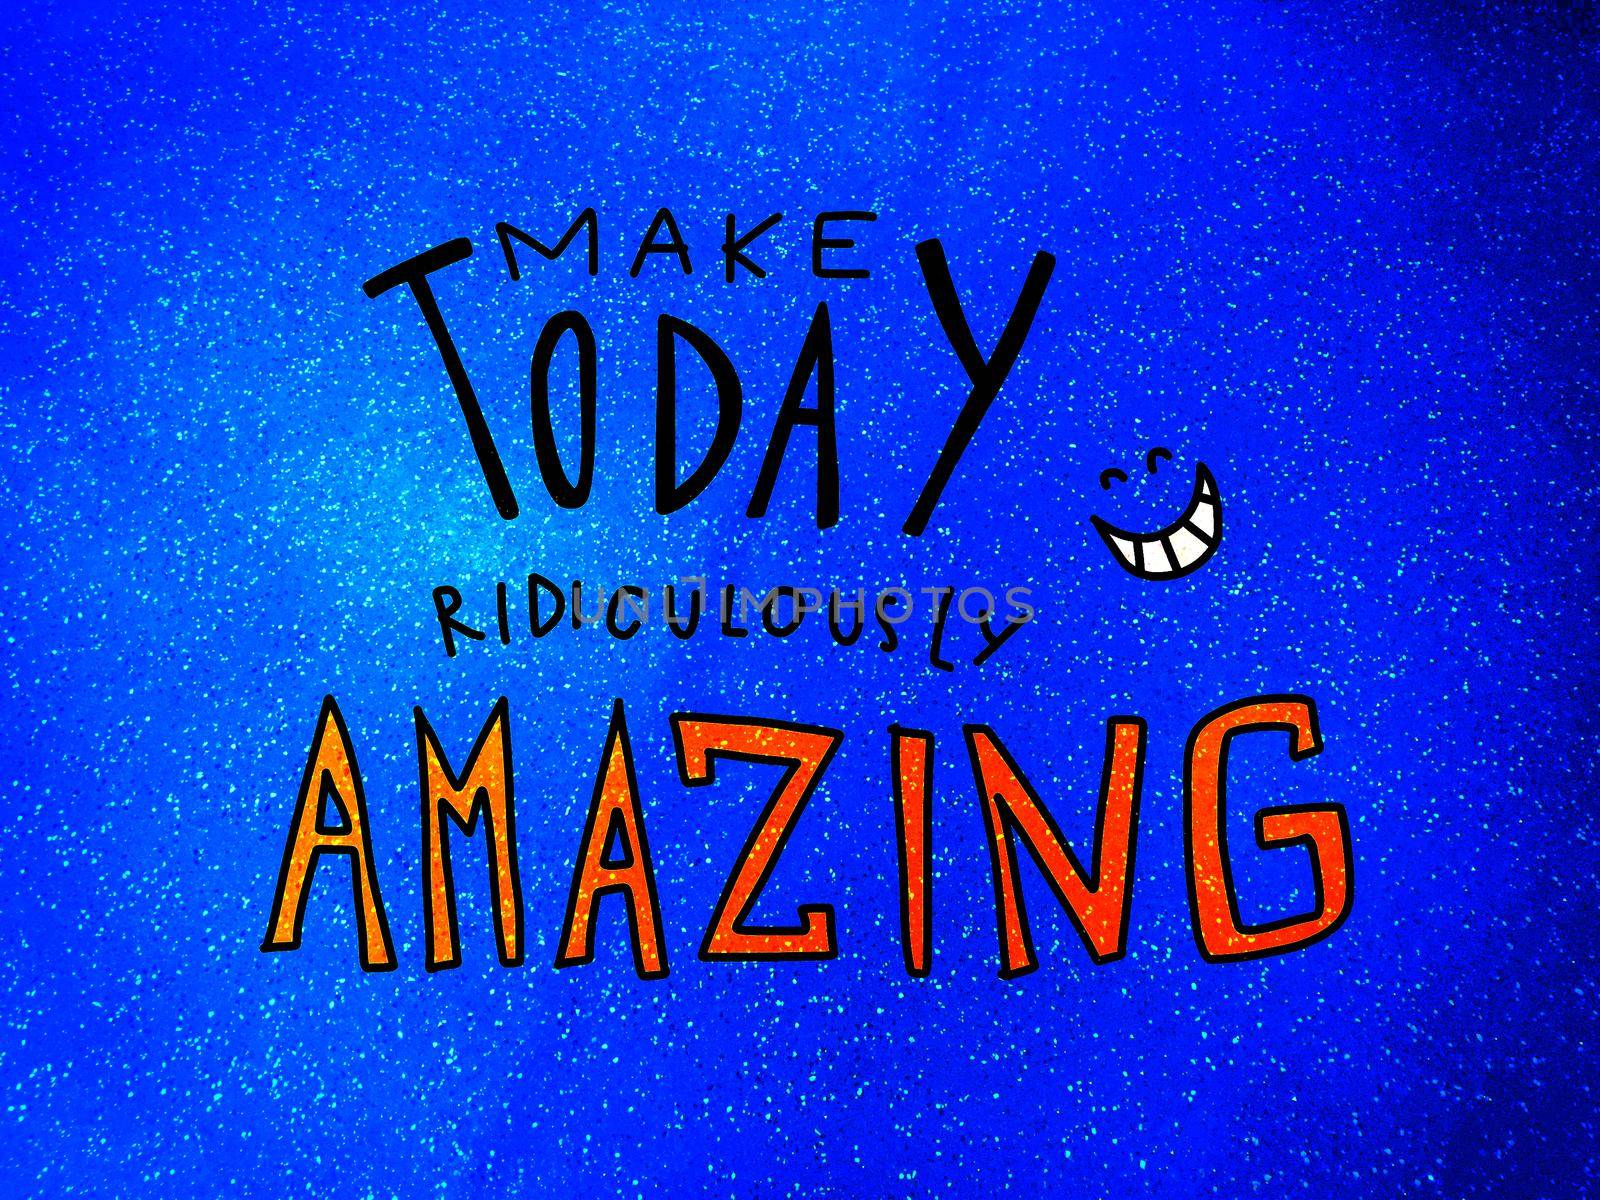 Make today ridiculously amazing word and smile face on dark blue sparkle background illustration